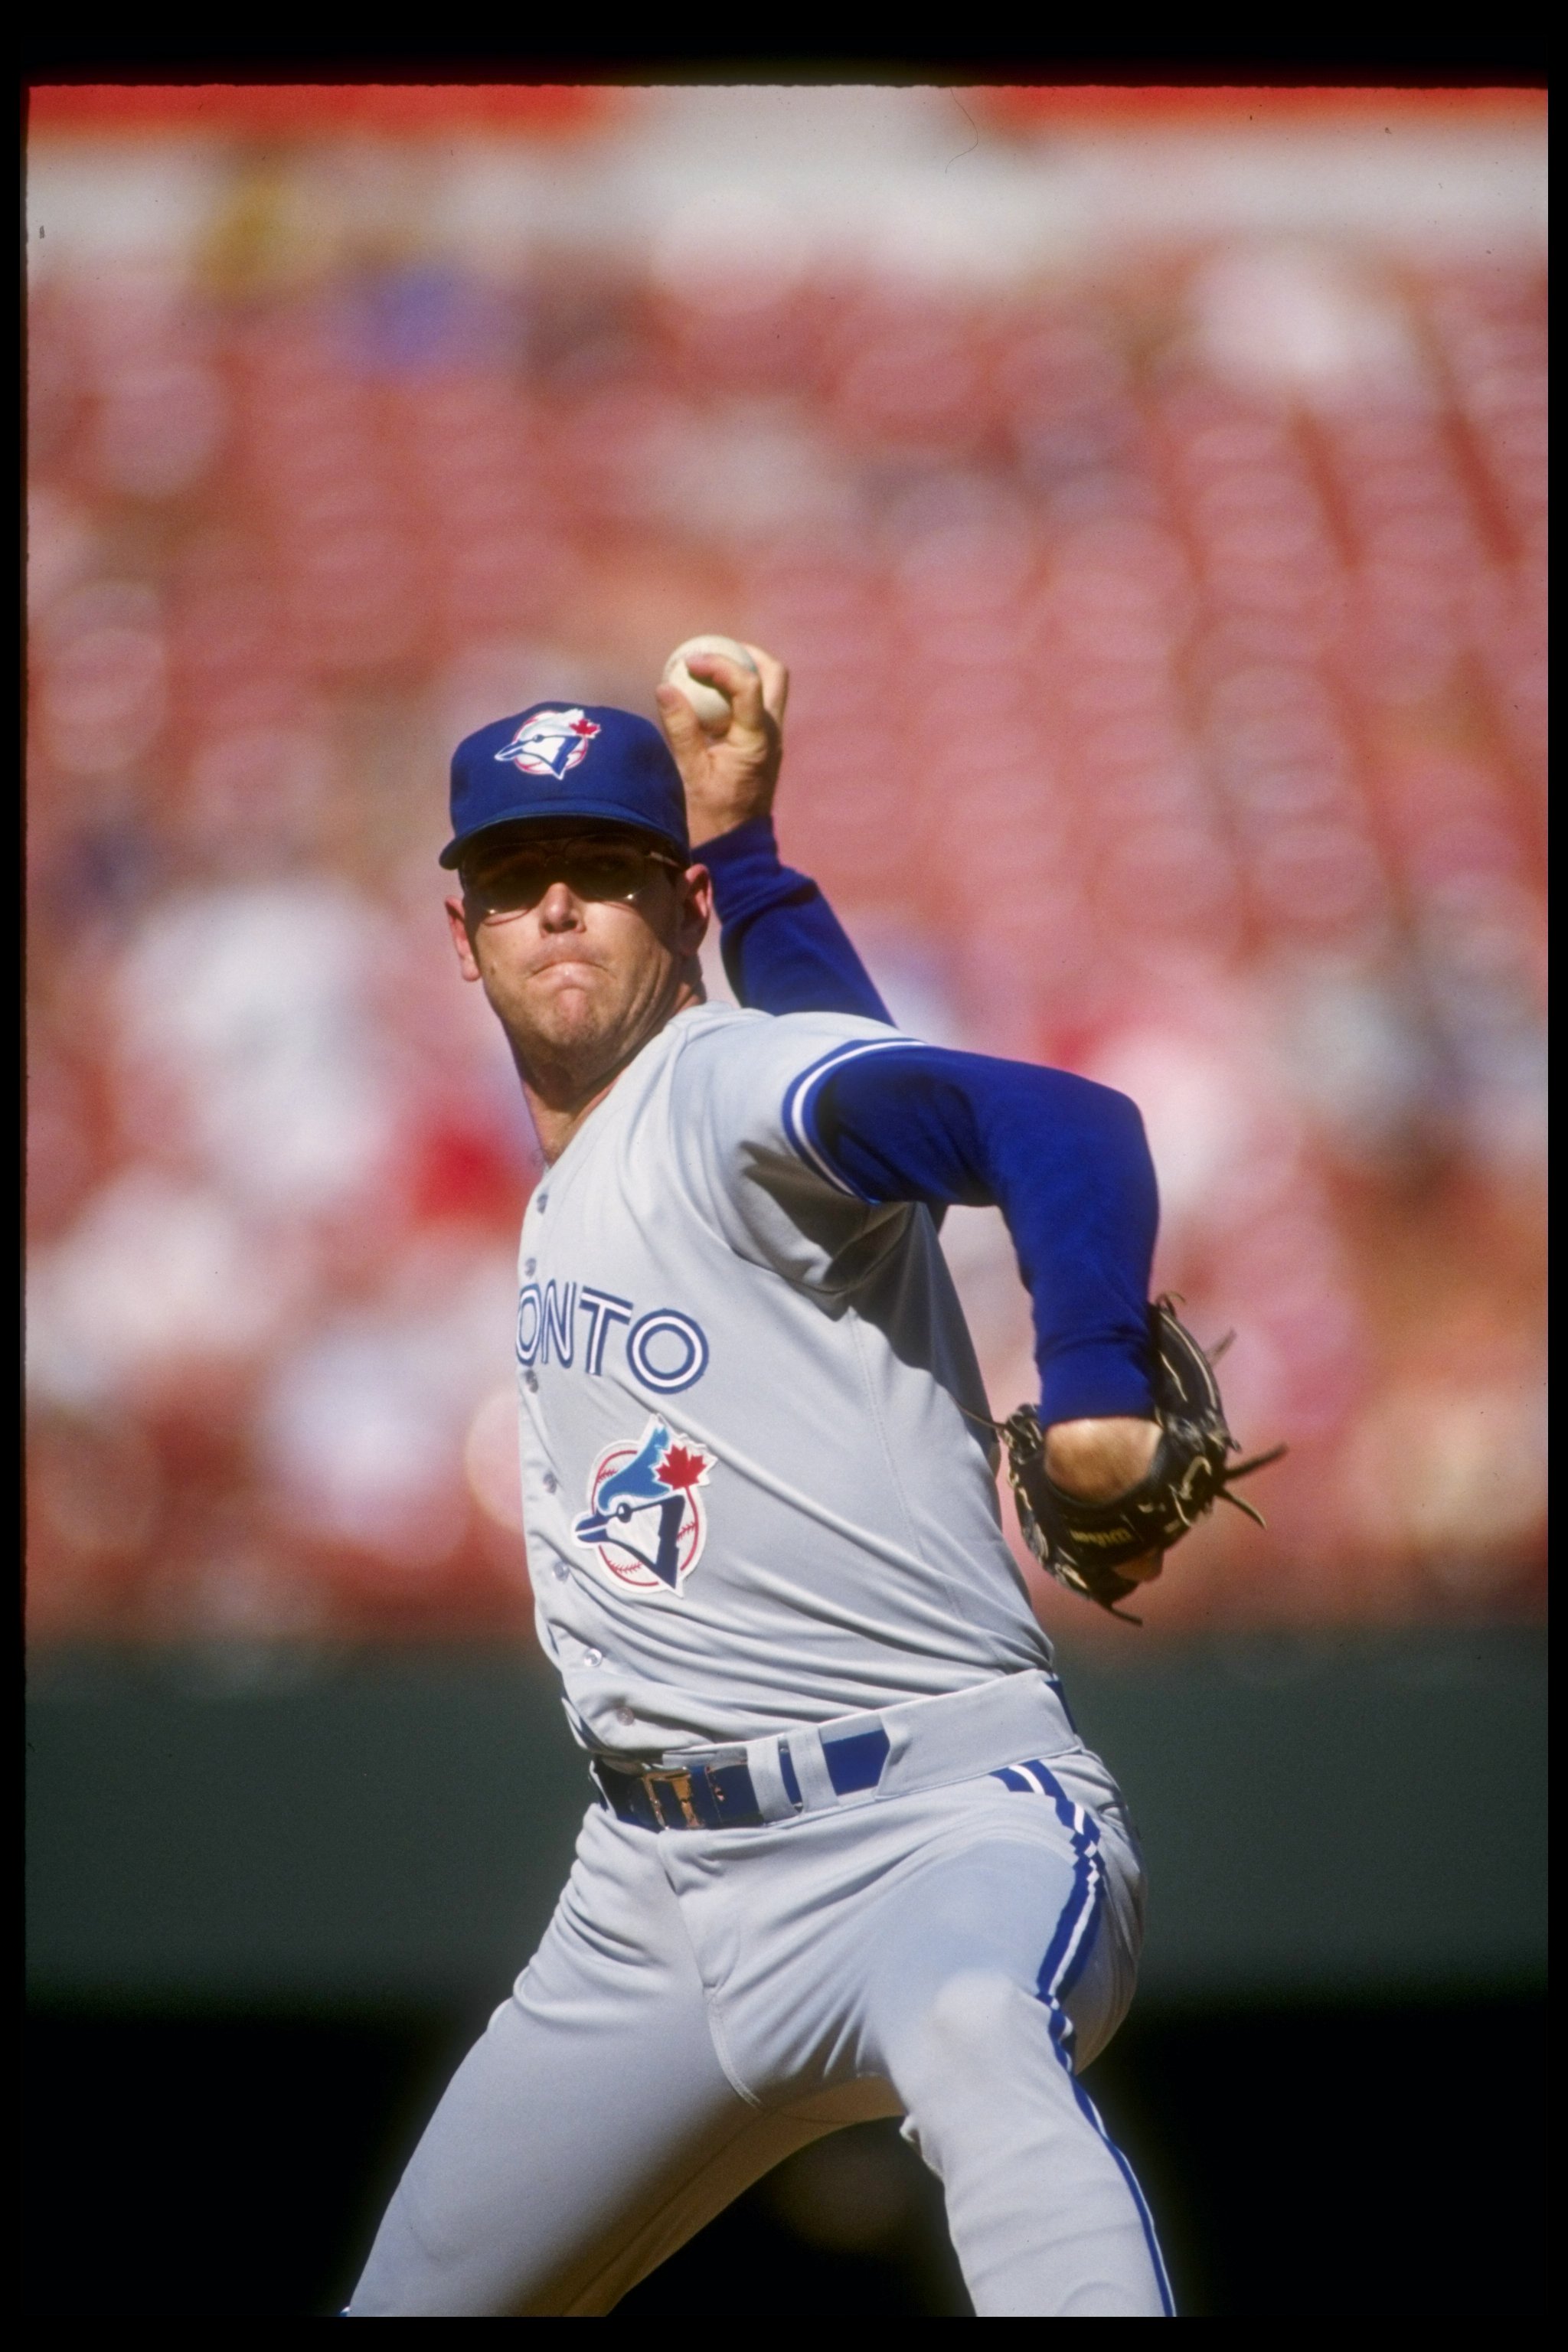 1990:  Pitcher Tom Henke of the Toronto Blue Jays throws a pitch during a game. Mandatory Credit: Stephen Dunn  /Allsport